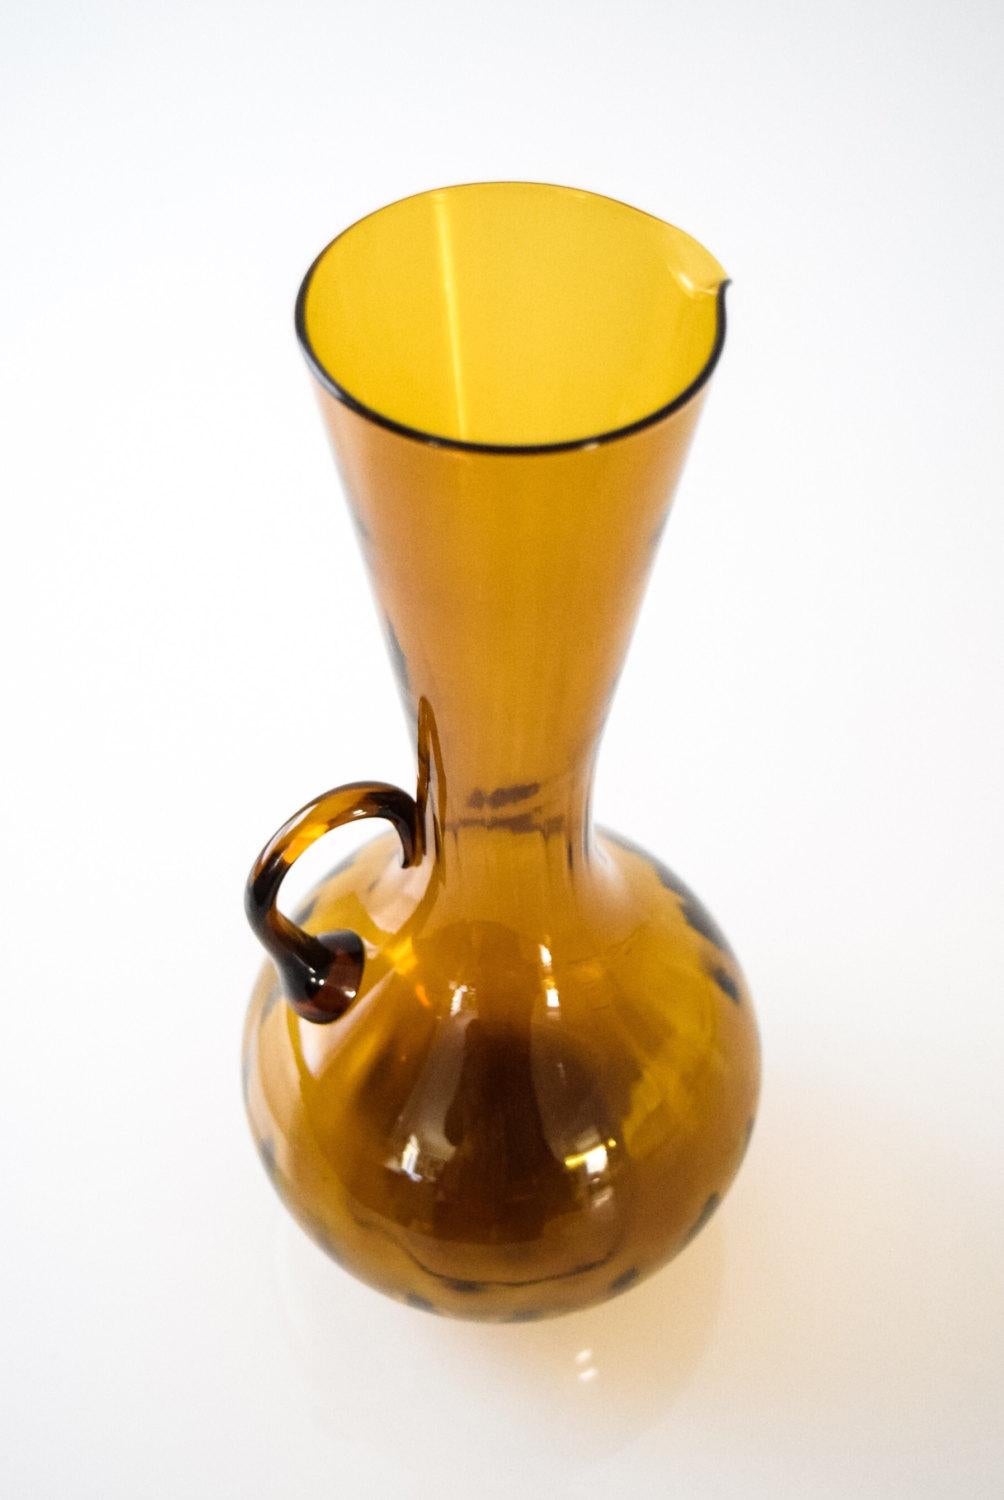 This vintage midcentury decorative glass pitcher is a beautiful deep amber and features a sleek and elegant Mid-Century Modern design with a lovely profile. It can be used as a small water pitcher, decorative pitcher or vase.

Dimensions
Height: